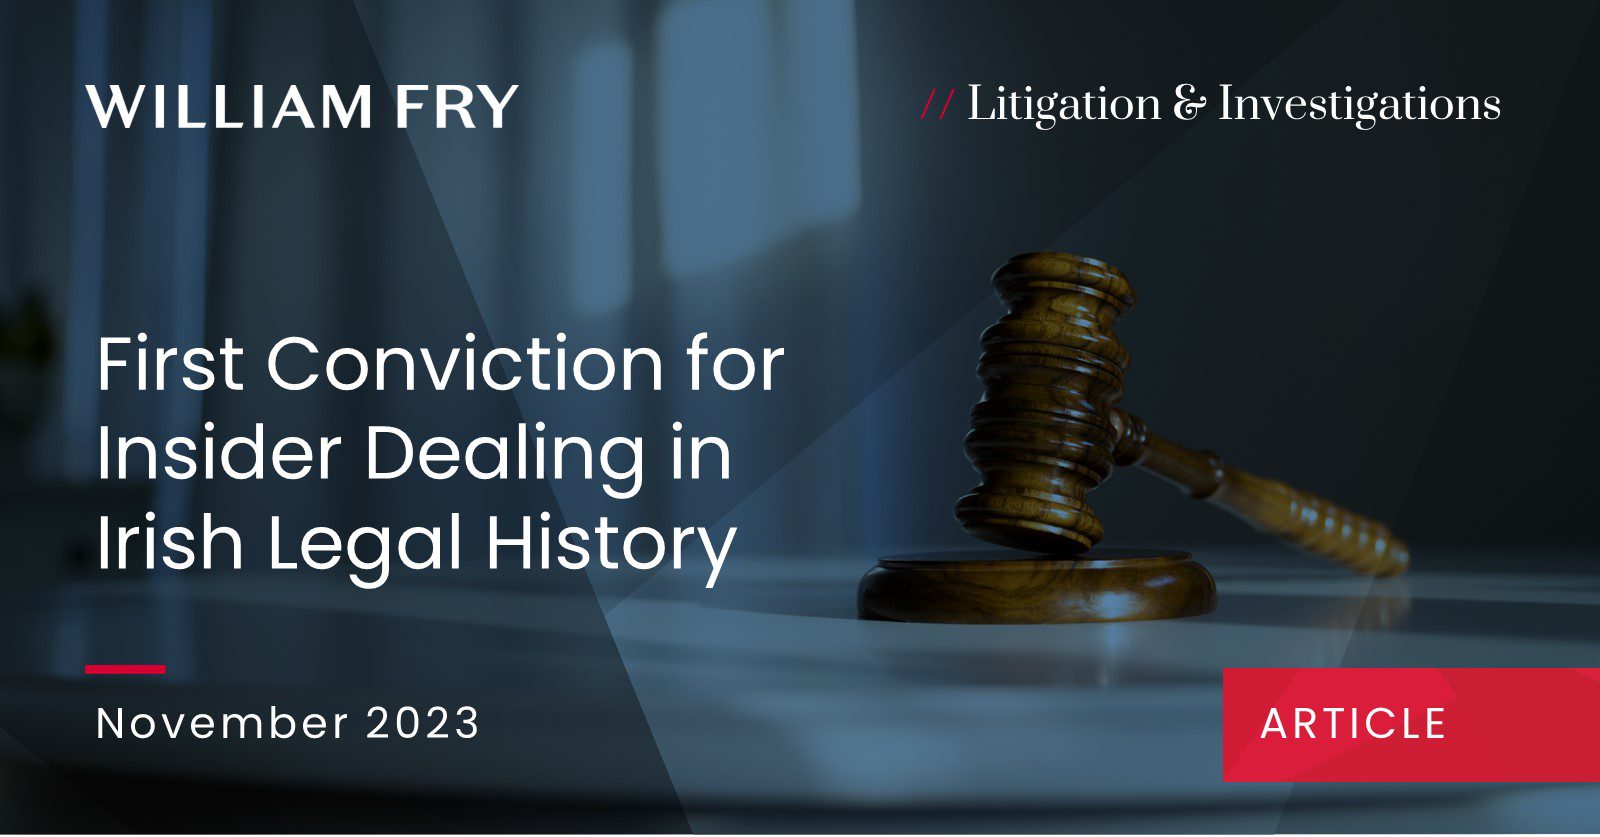 First Conviction for Insider Dealing in Irish Legal History